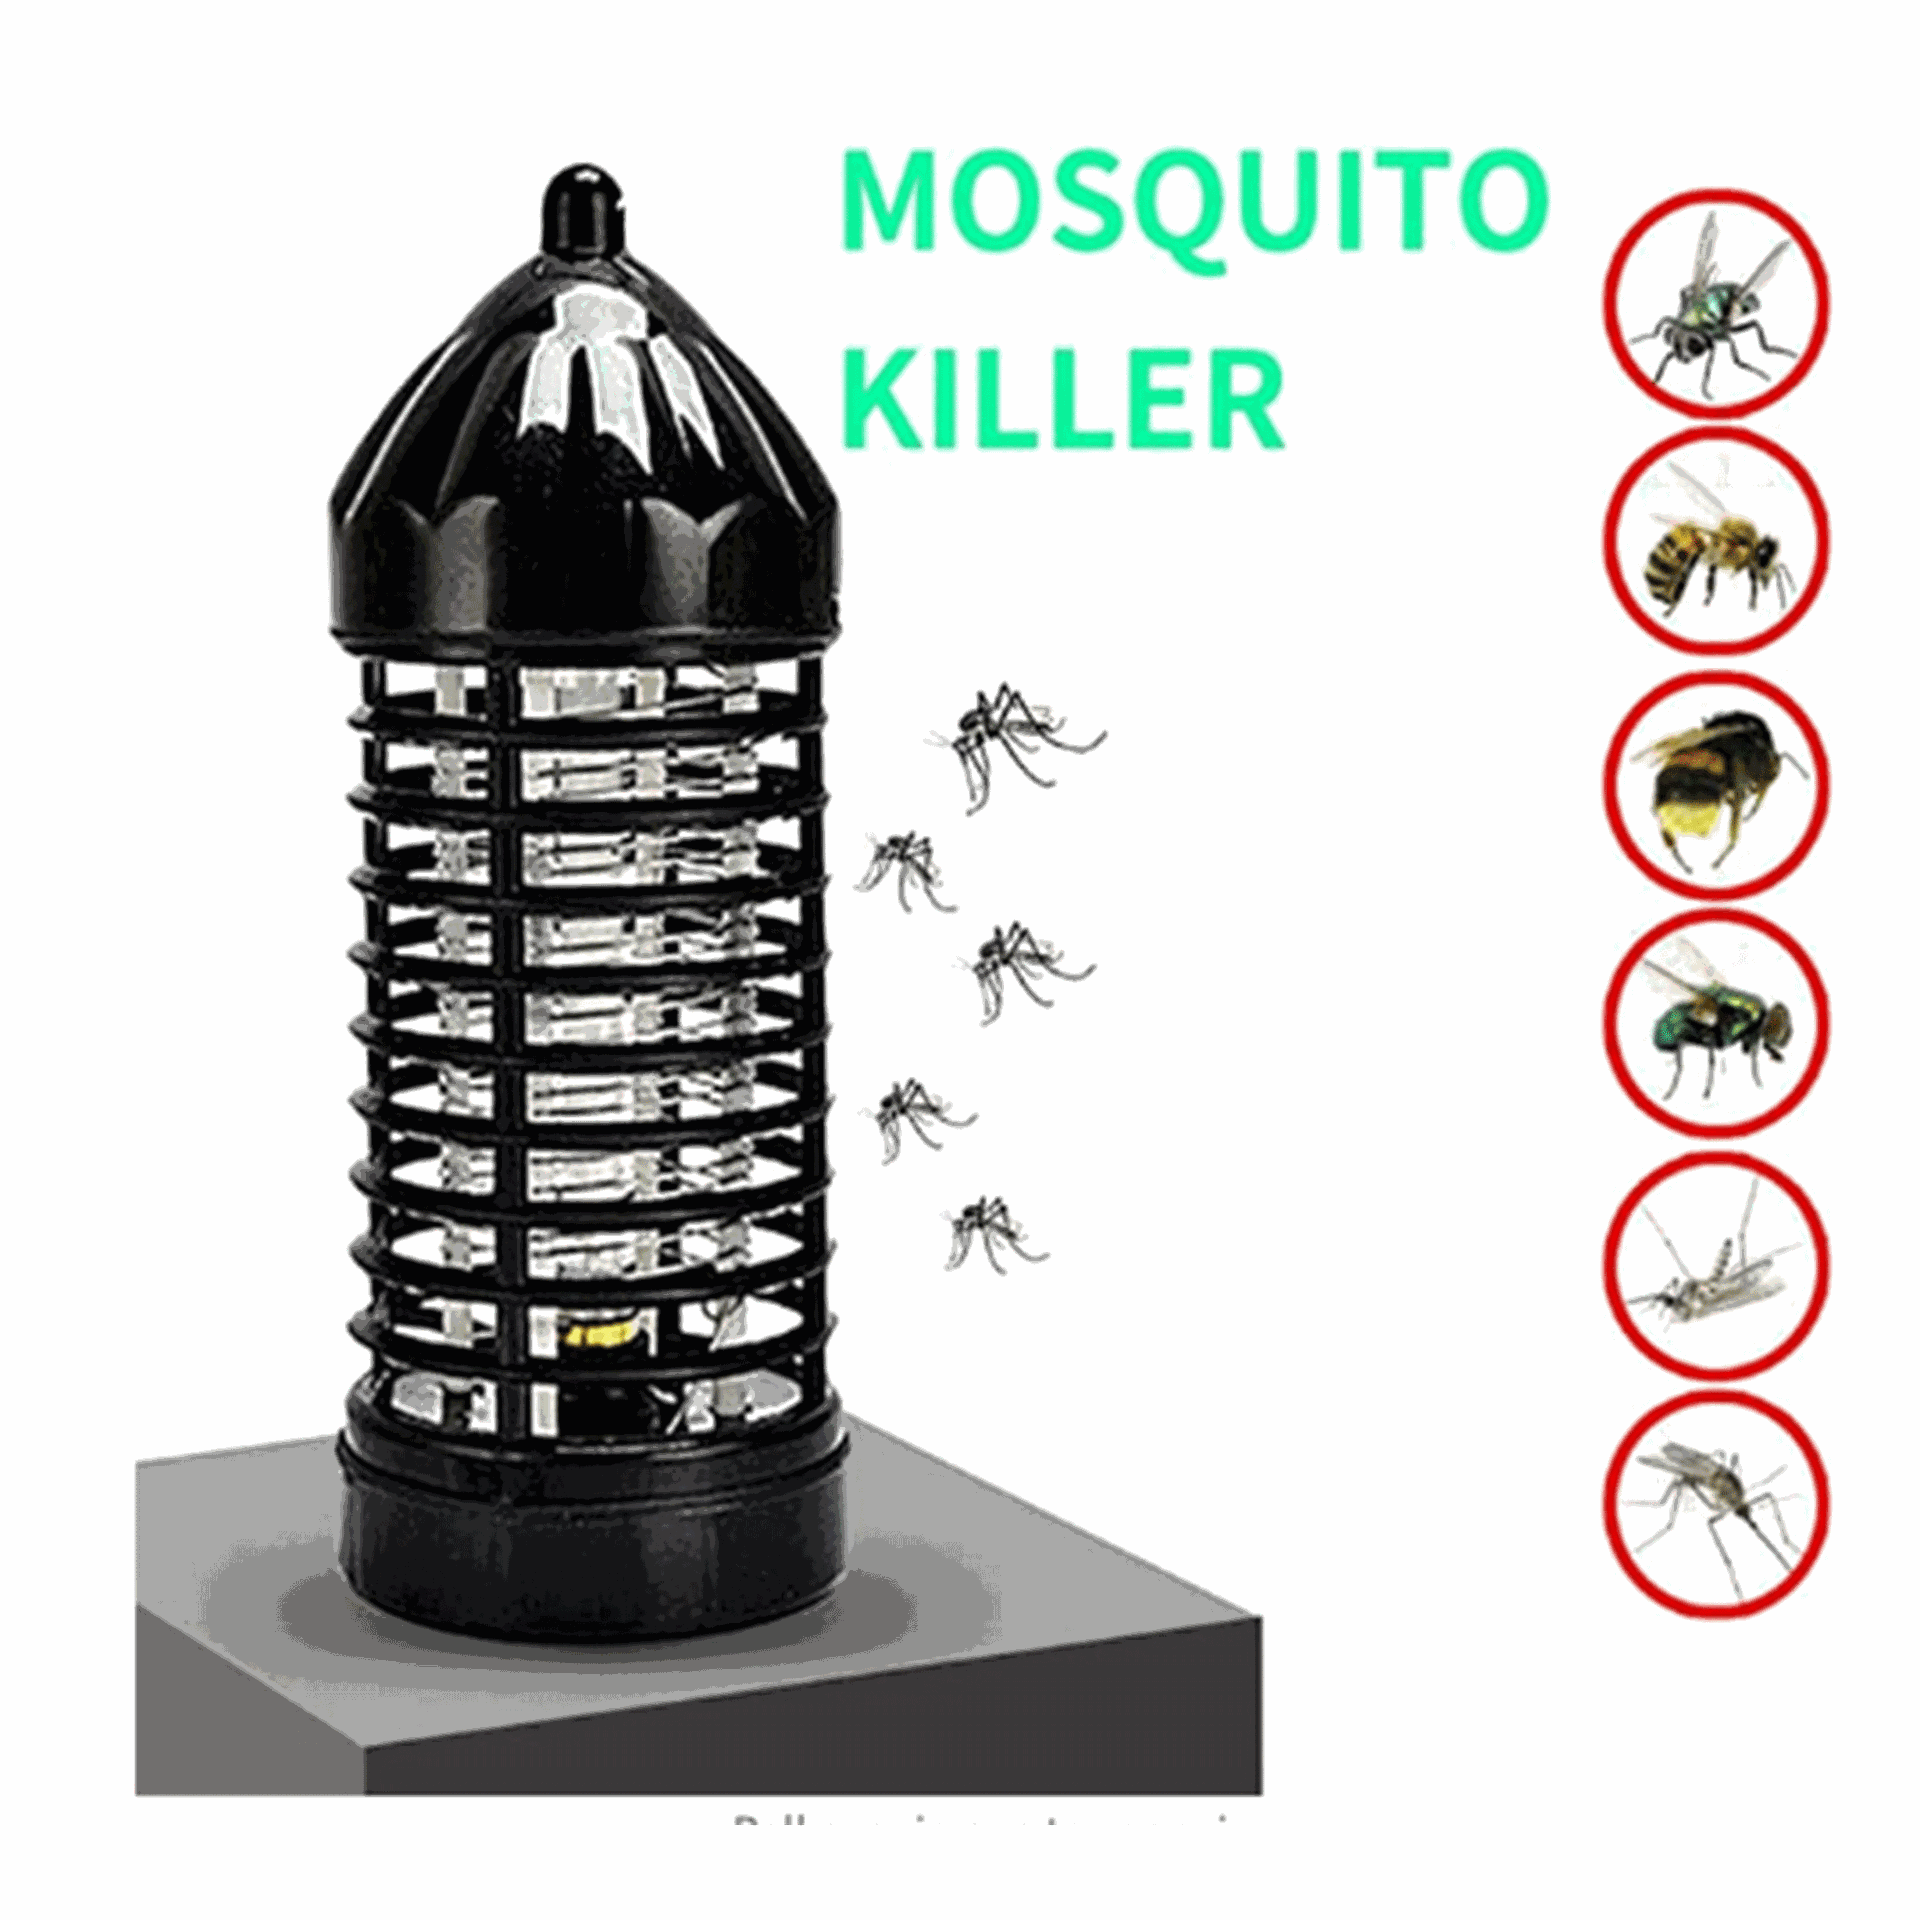 Electric Shock Mosquito Killer Source Manufacturer Mosquito Killer Household Outdoor Mosquito Trap Lamp Radiation-Free Electronic Photocatalyst Trap Lamp